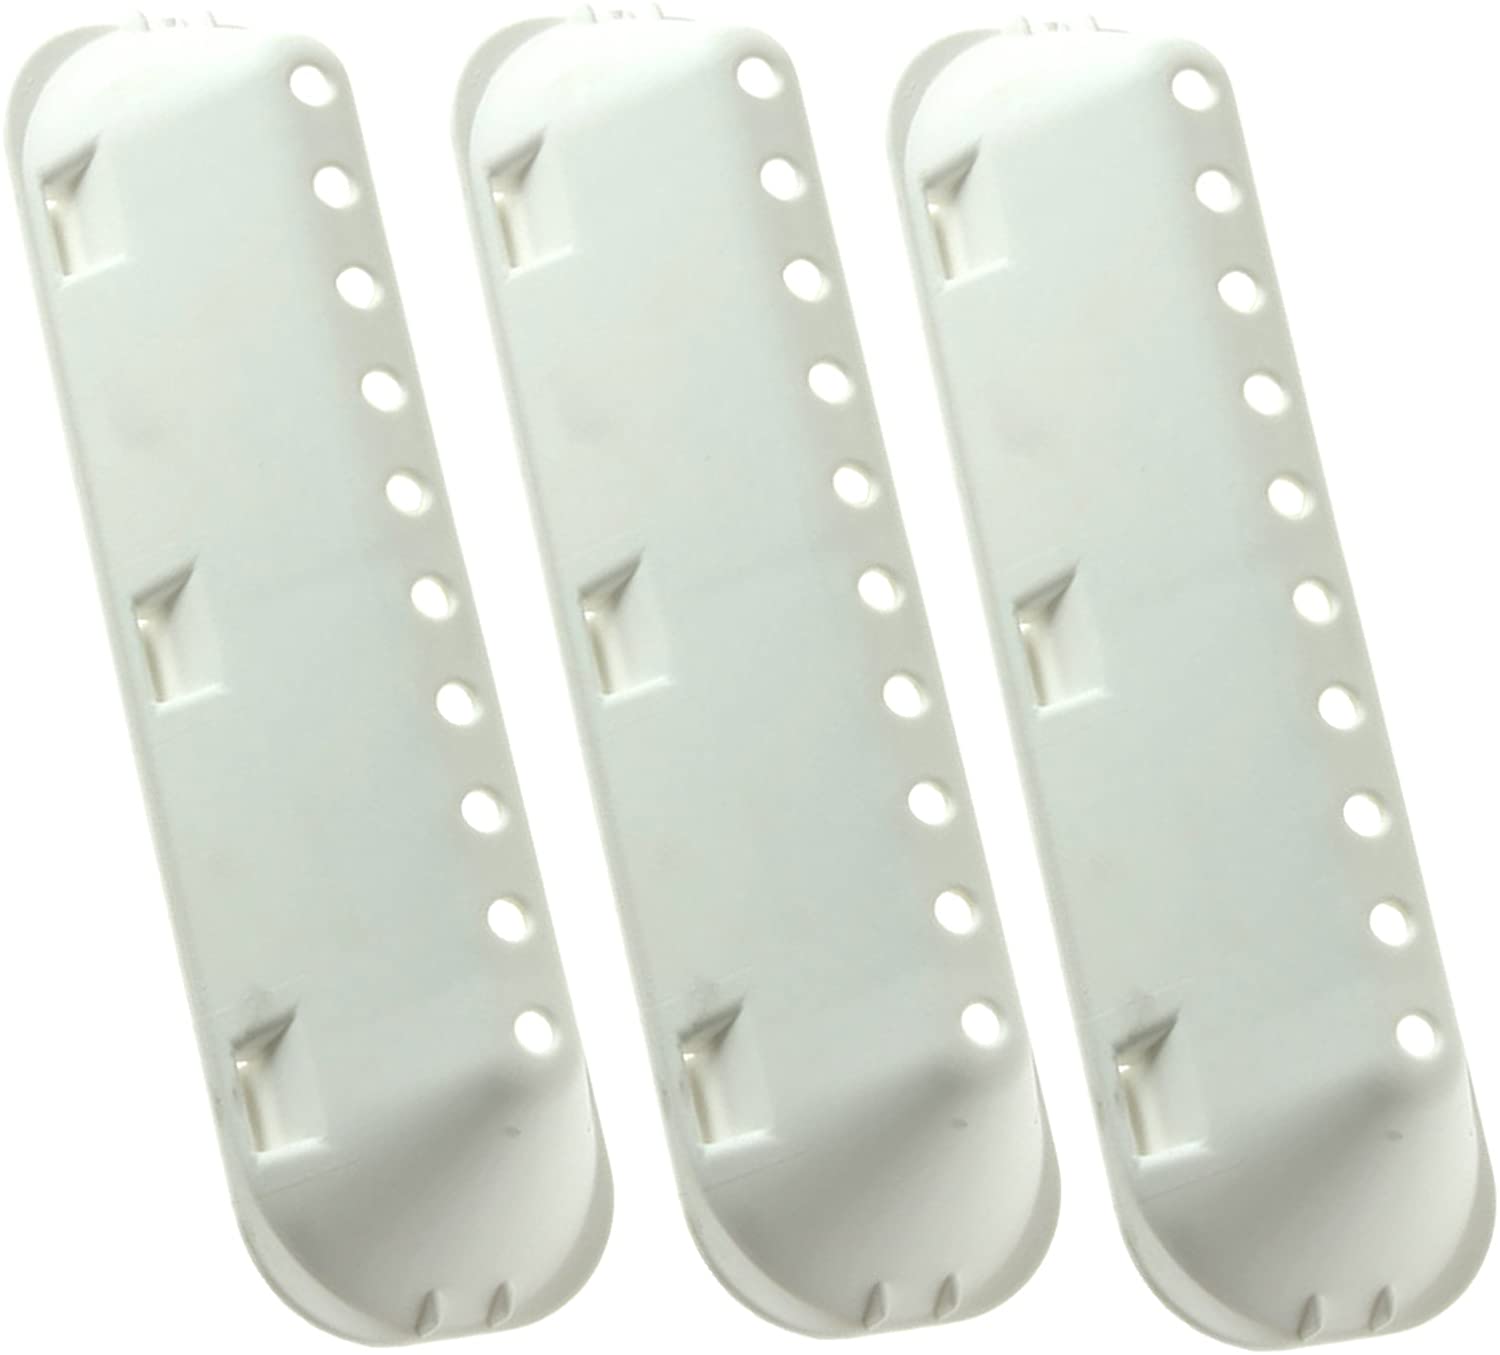 Hotpoint Washing Machine 10 Hole Drum Paddle Lifter Arms (Pack of 3, 183mm x 53mm x 38mm)